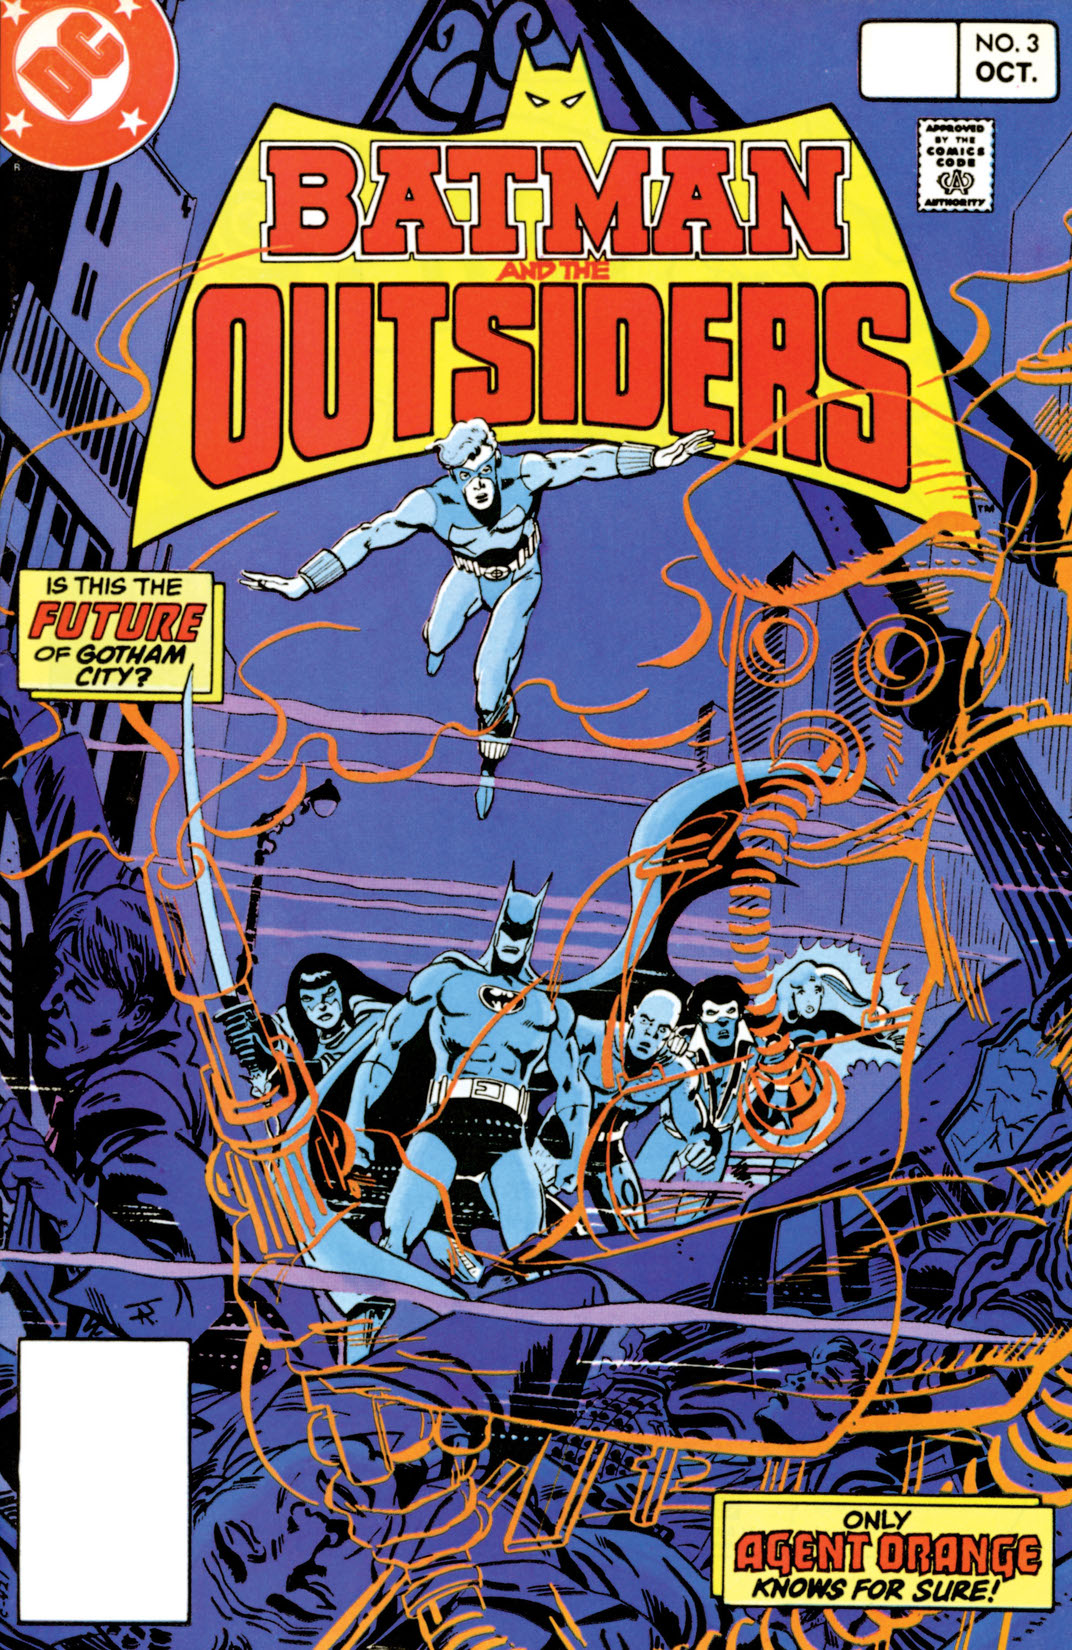 Batman and the Outsiders (1983-) #3 preview images